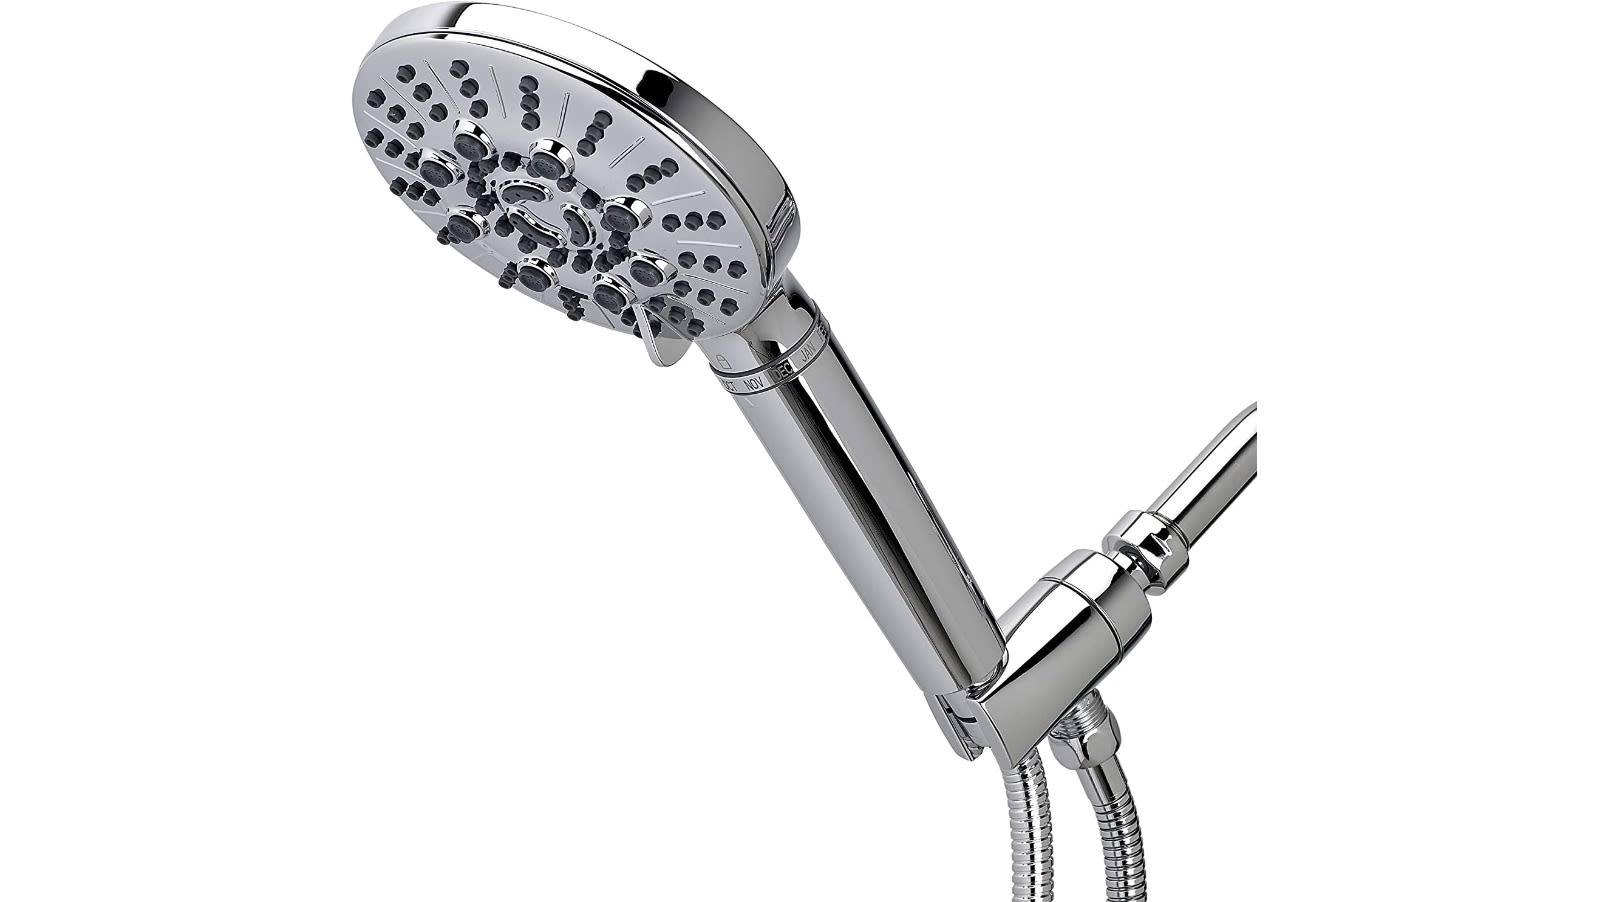 4 Best Shower Head Filters For Soft Hair And Better Skin